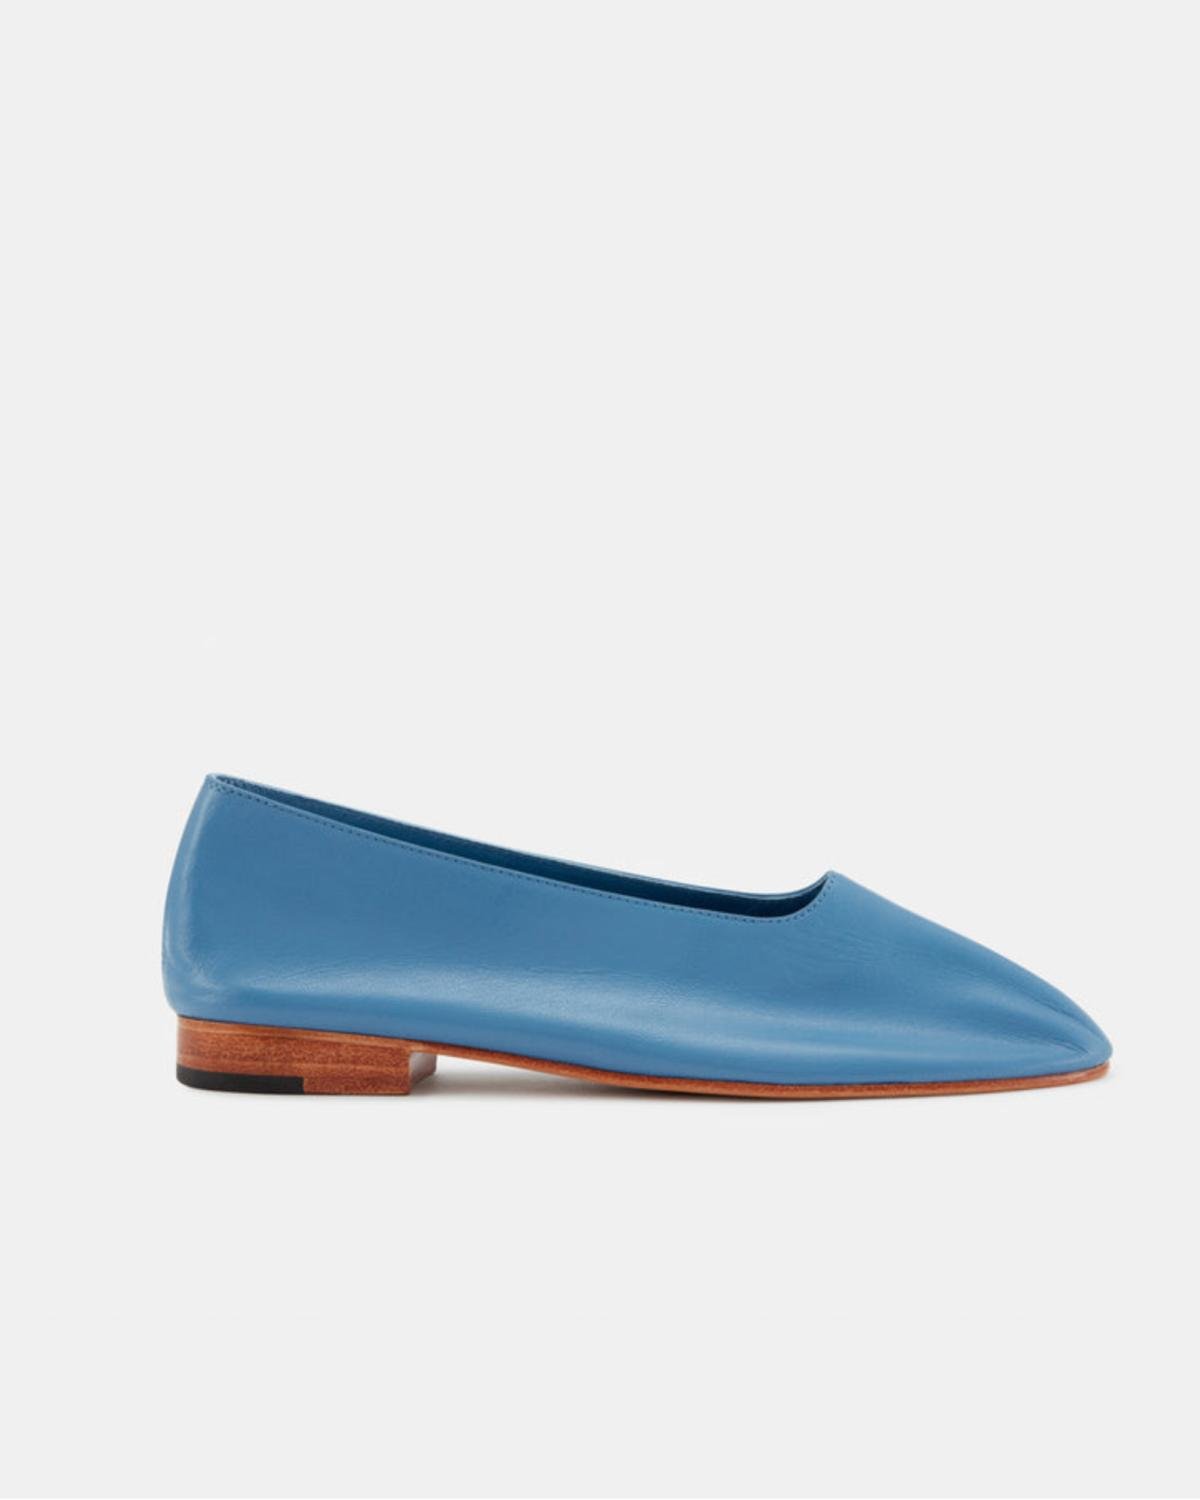 24 Pairs Of Ballet Flats To Wear This Summer - FASHION Magazine